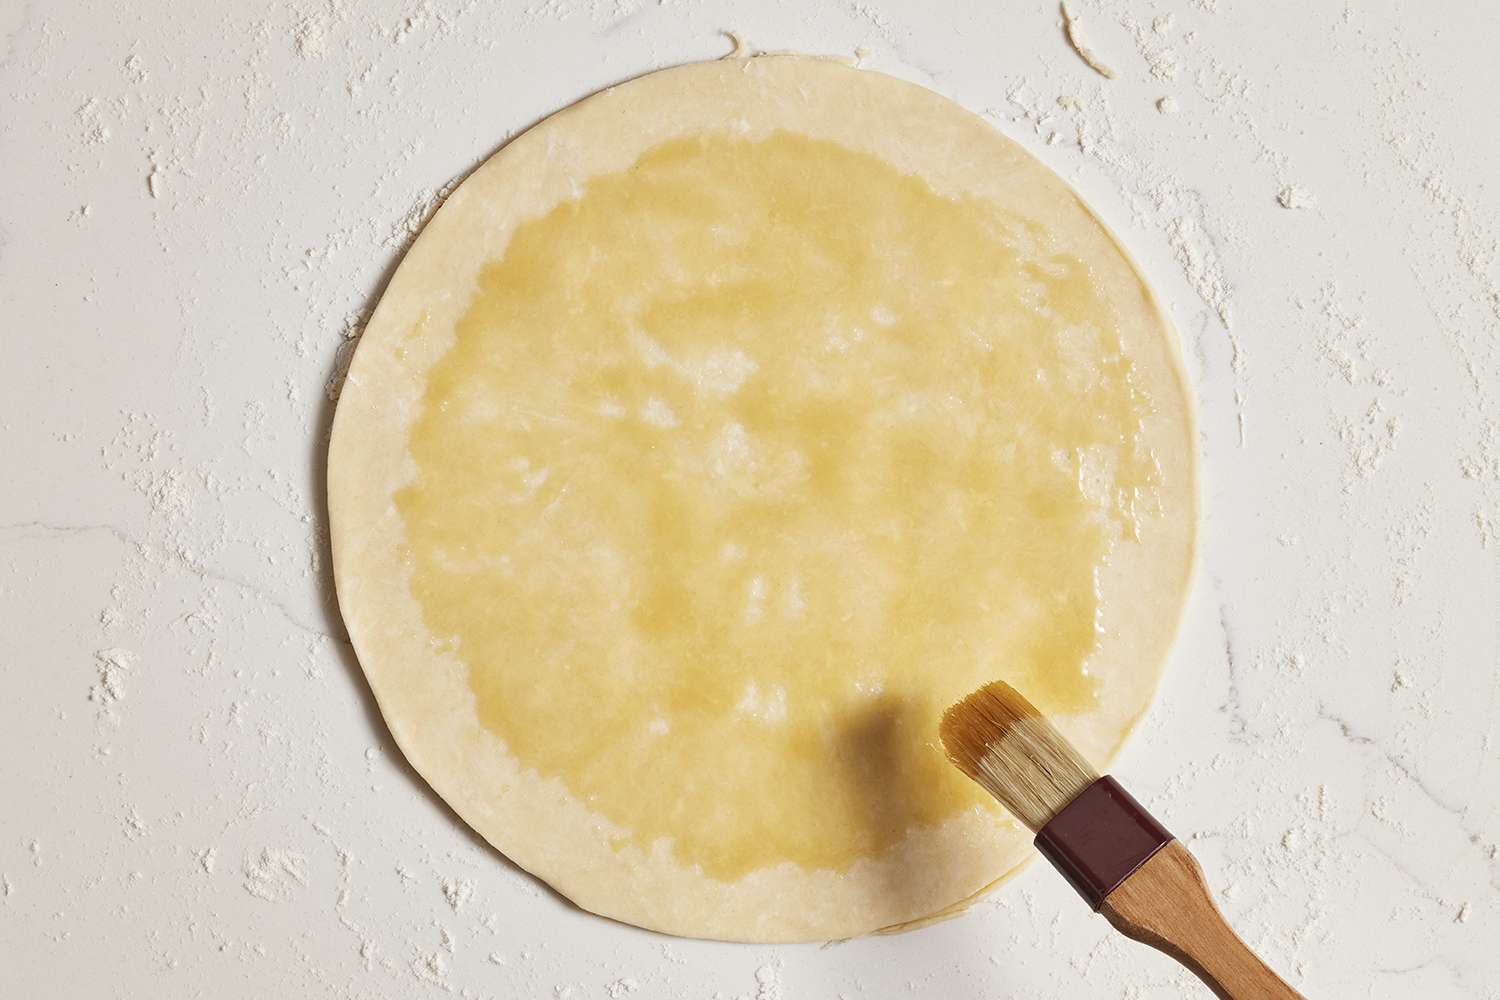 honey being applied to dough round with pastry brush